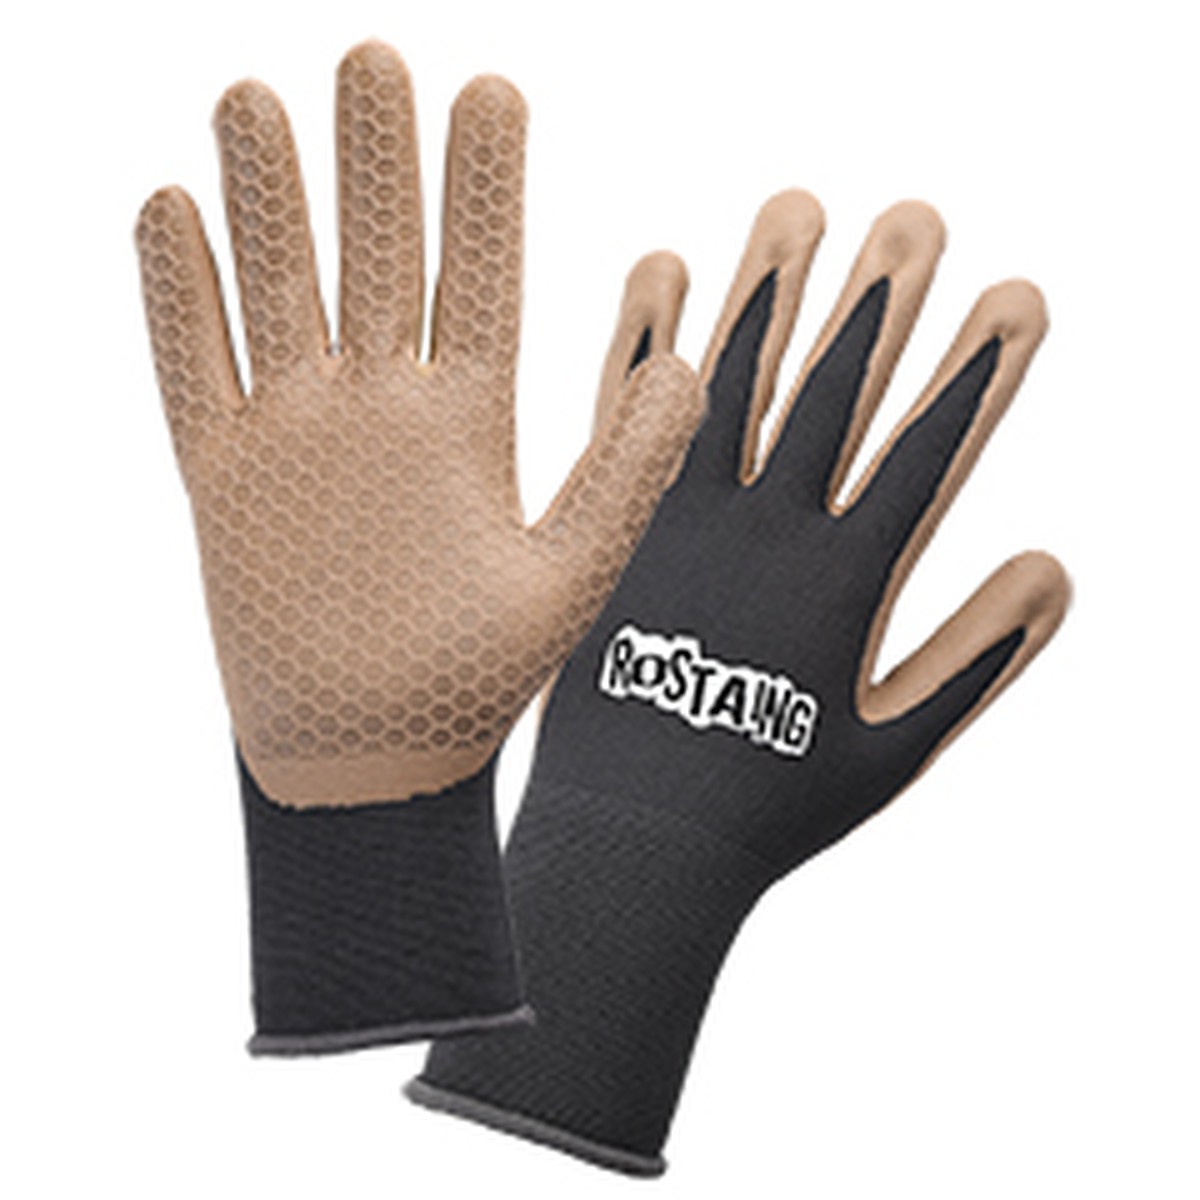 Rostaing  Gants One4All  Taille 8